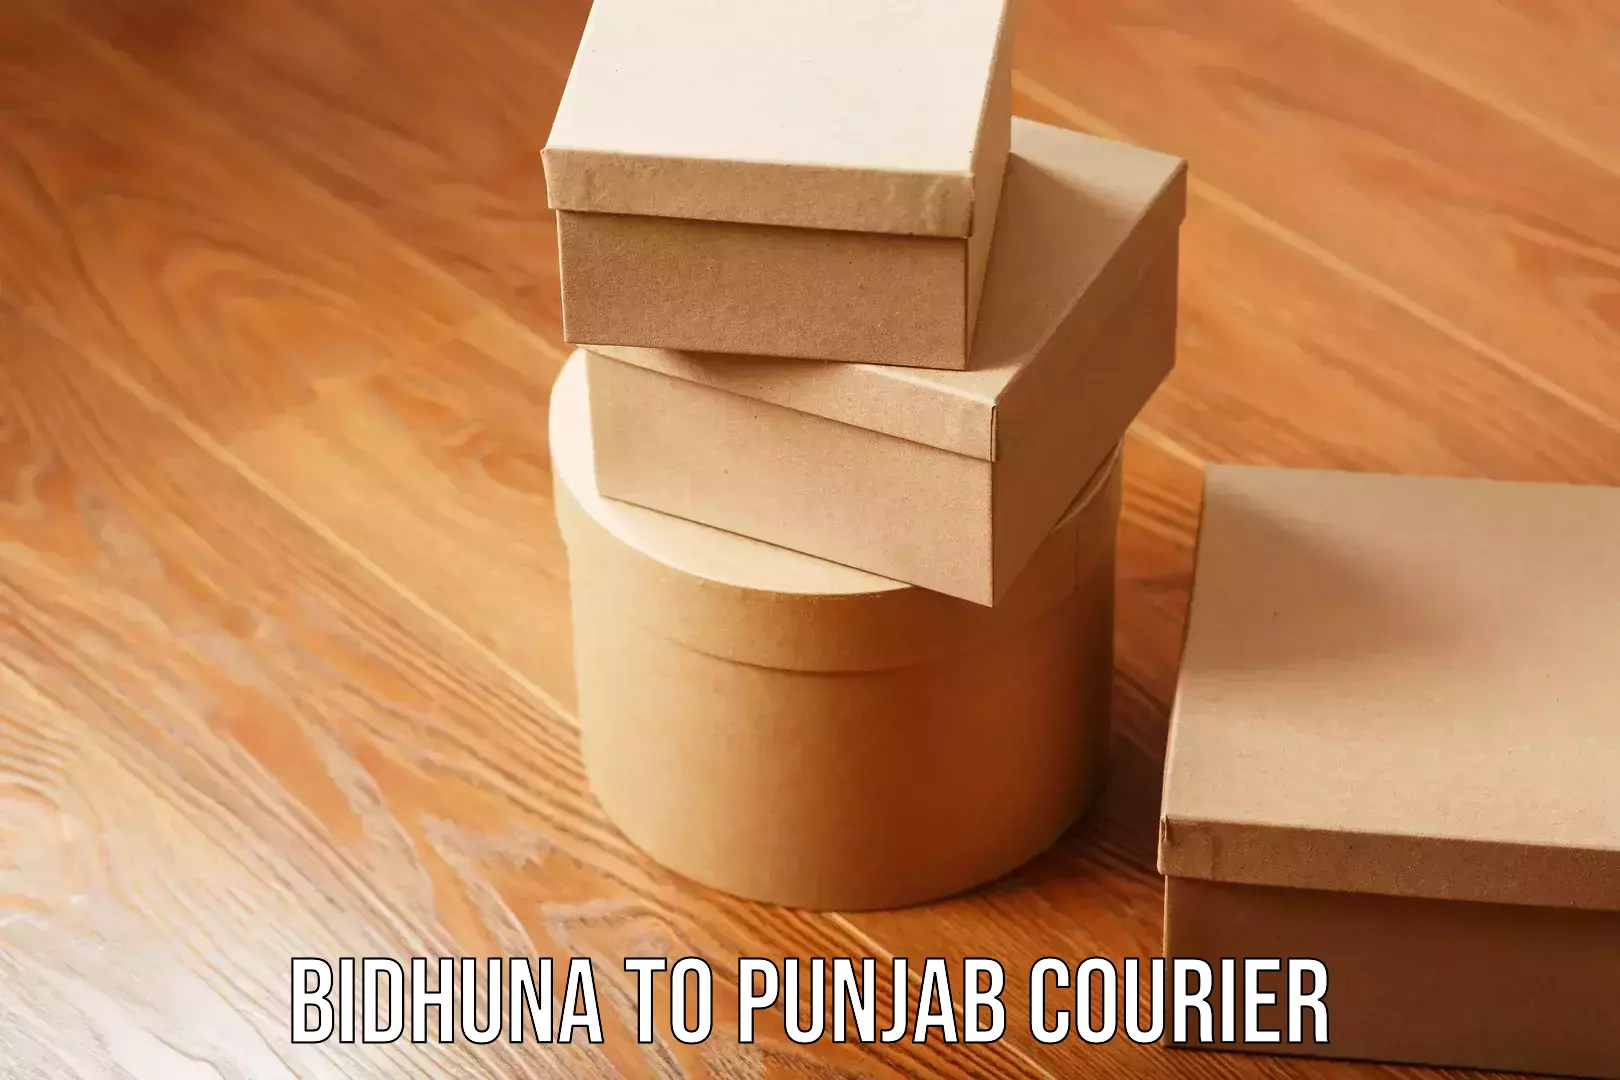 Express delivery solutions in Bidhuna to Punjab